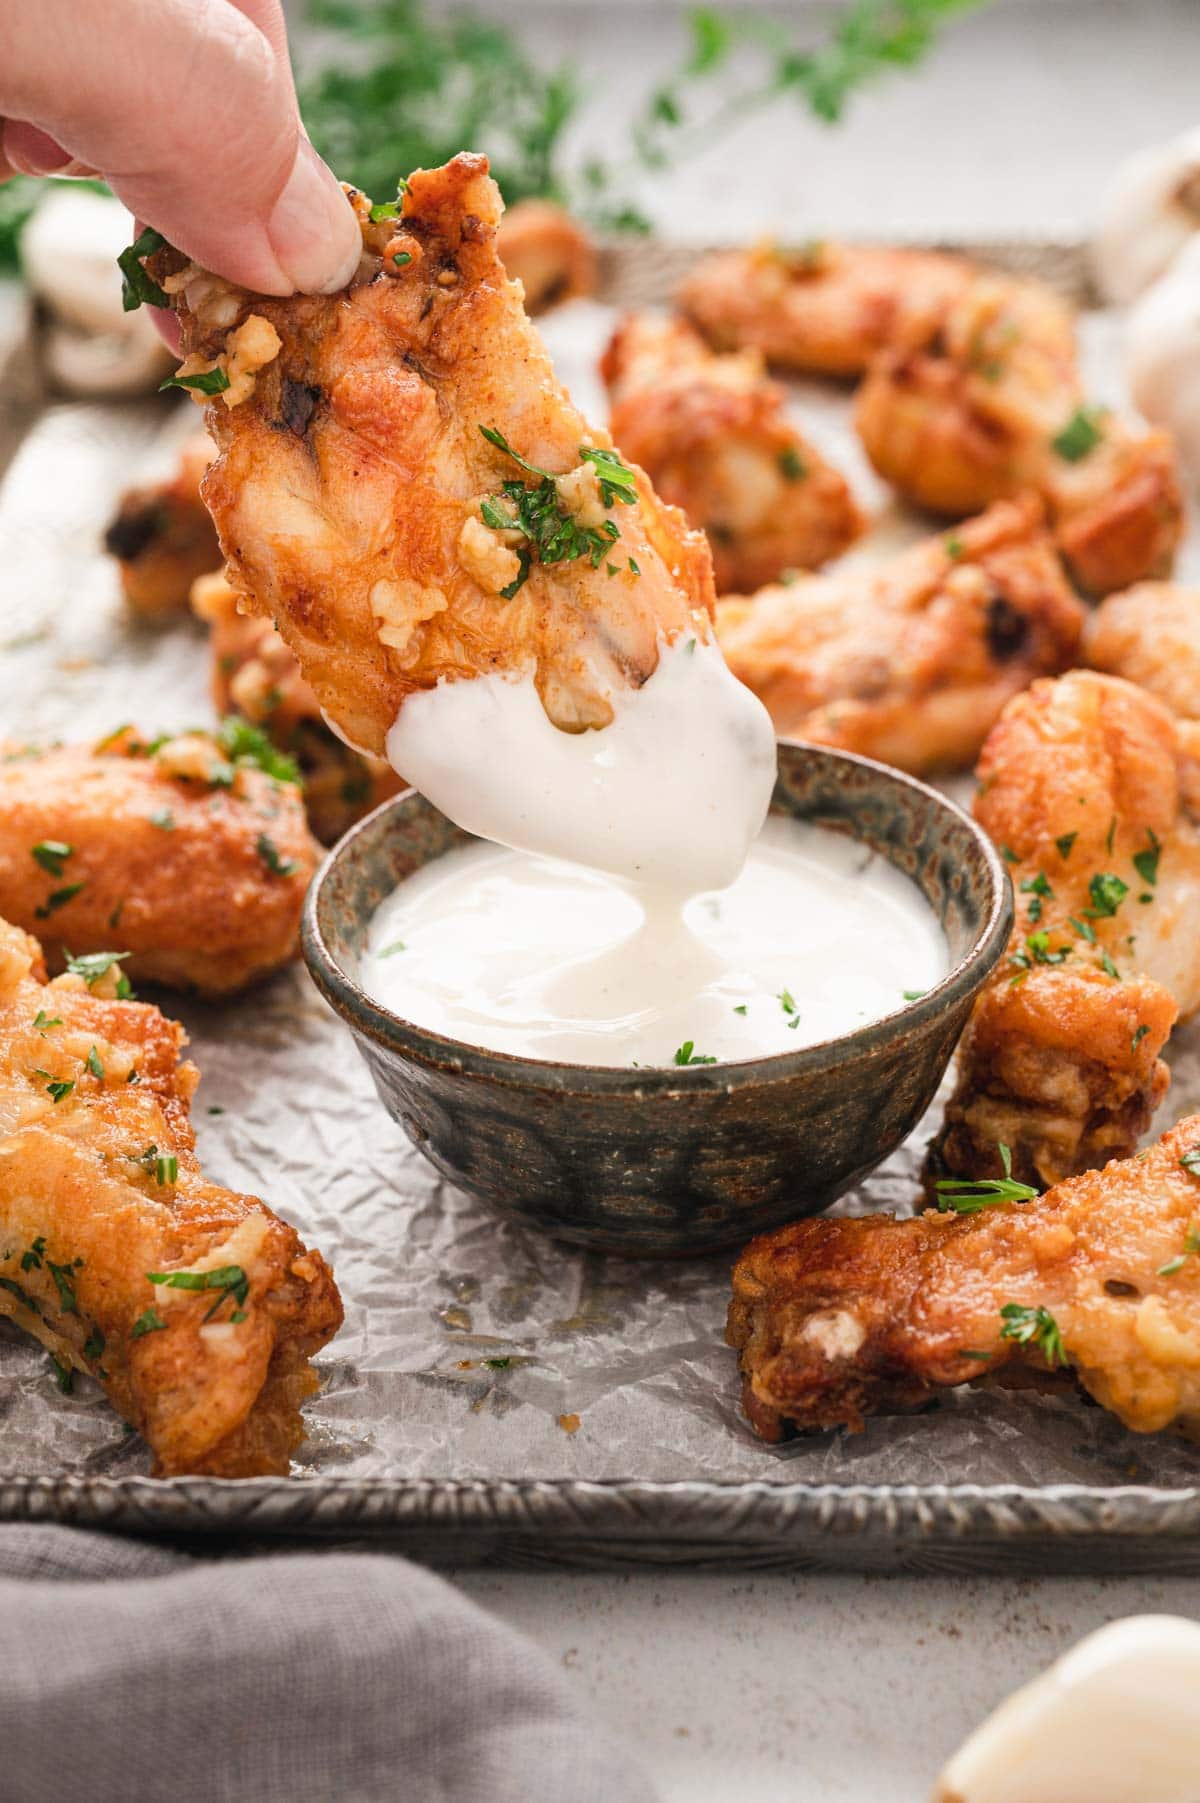 Garlic chicken wings dipped into a dish of ranch.